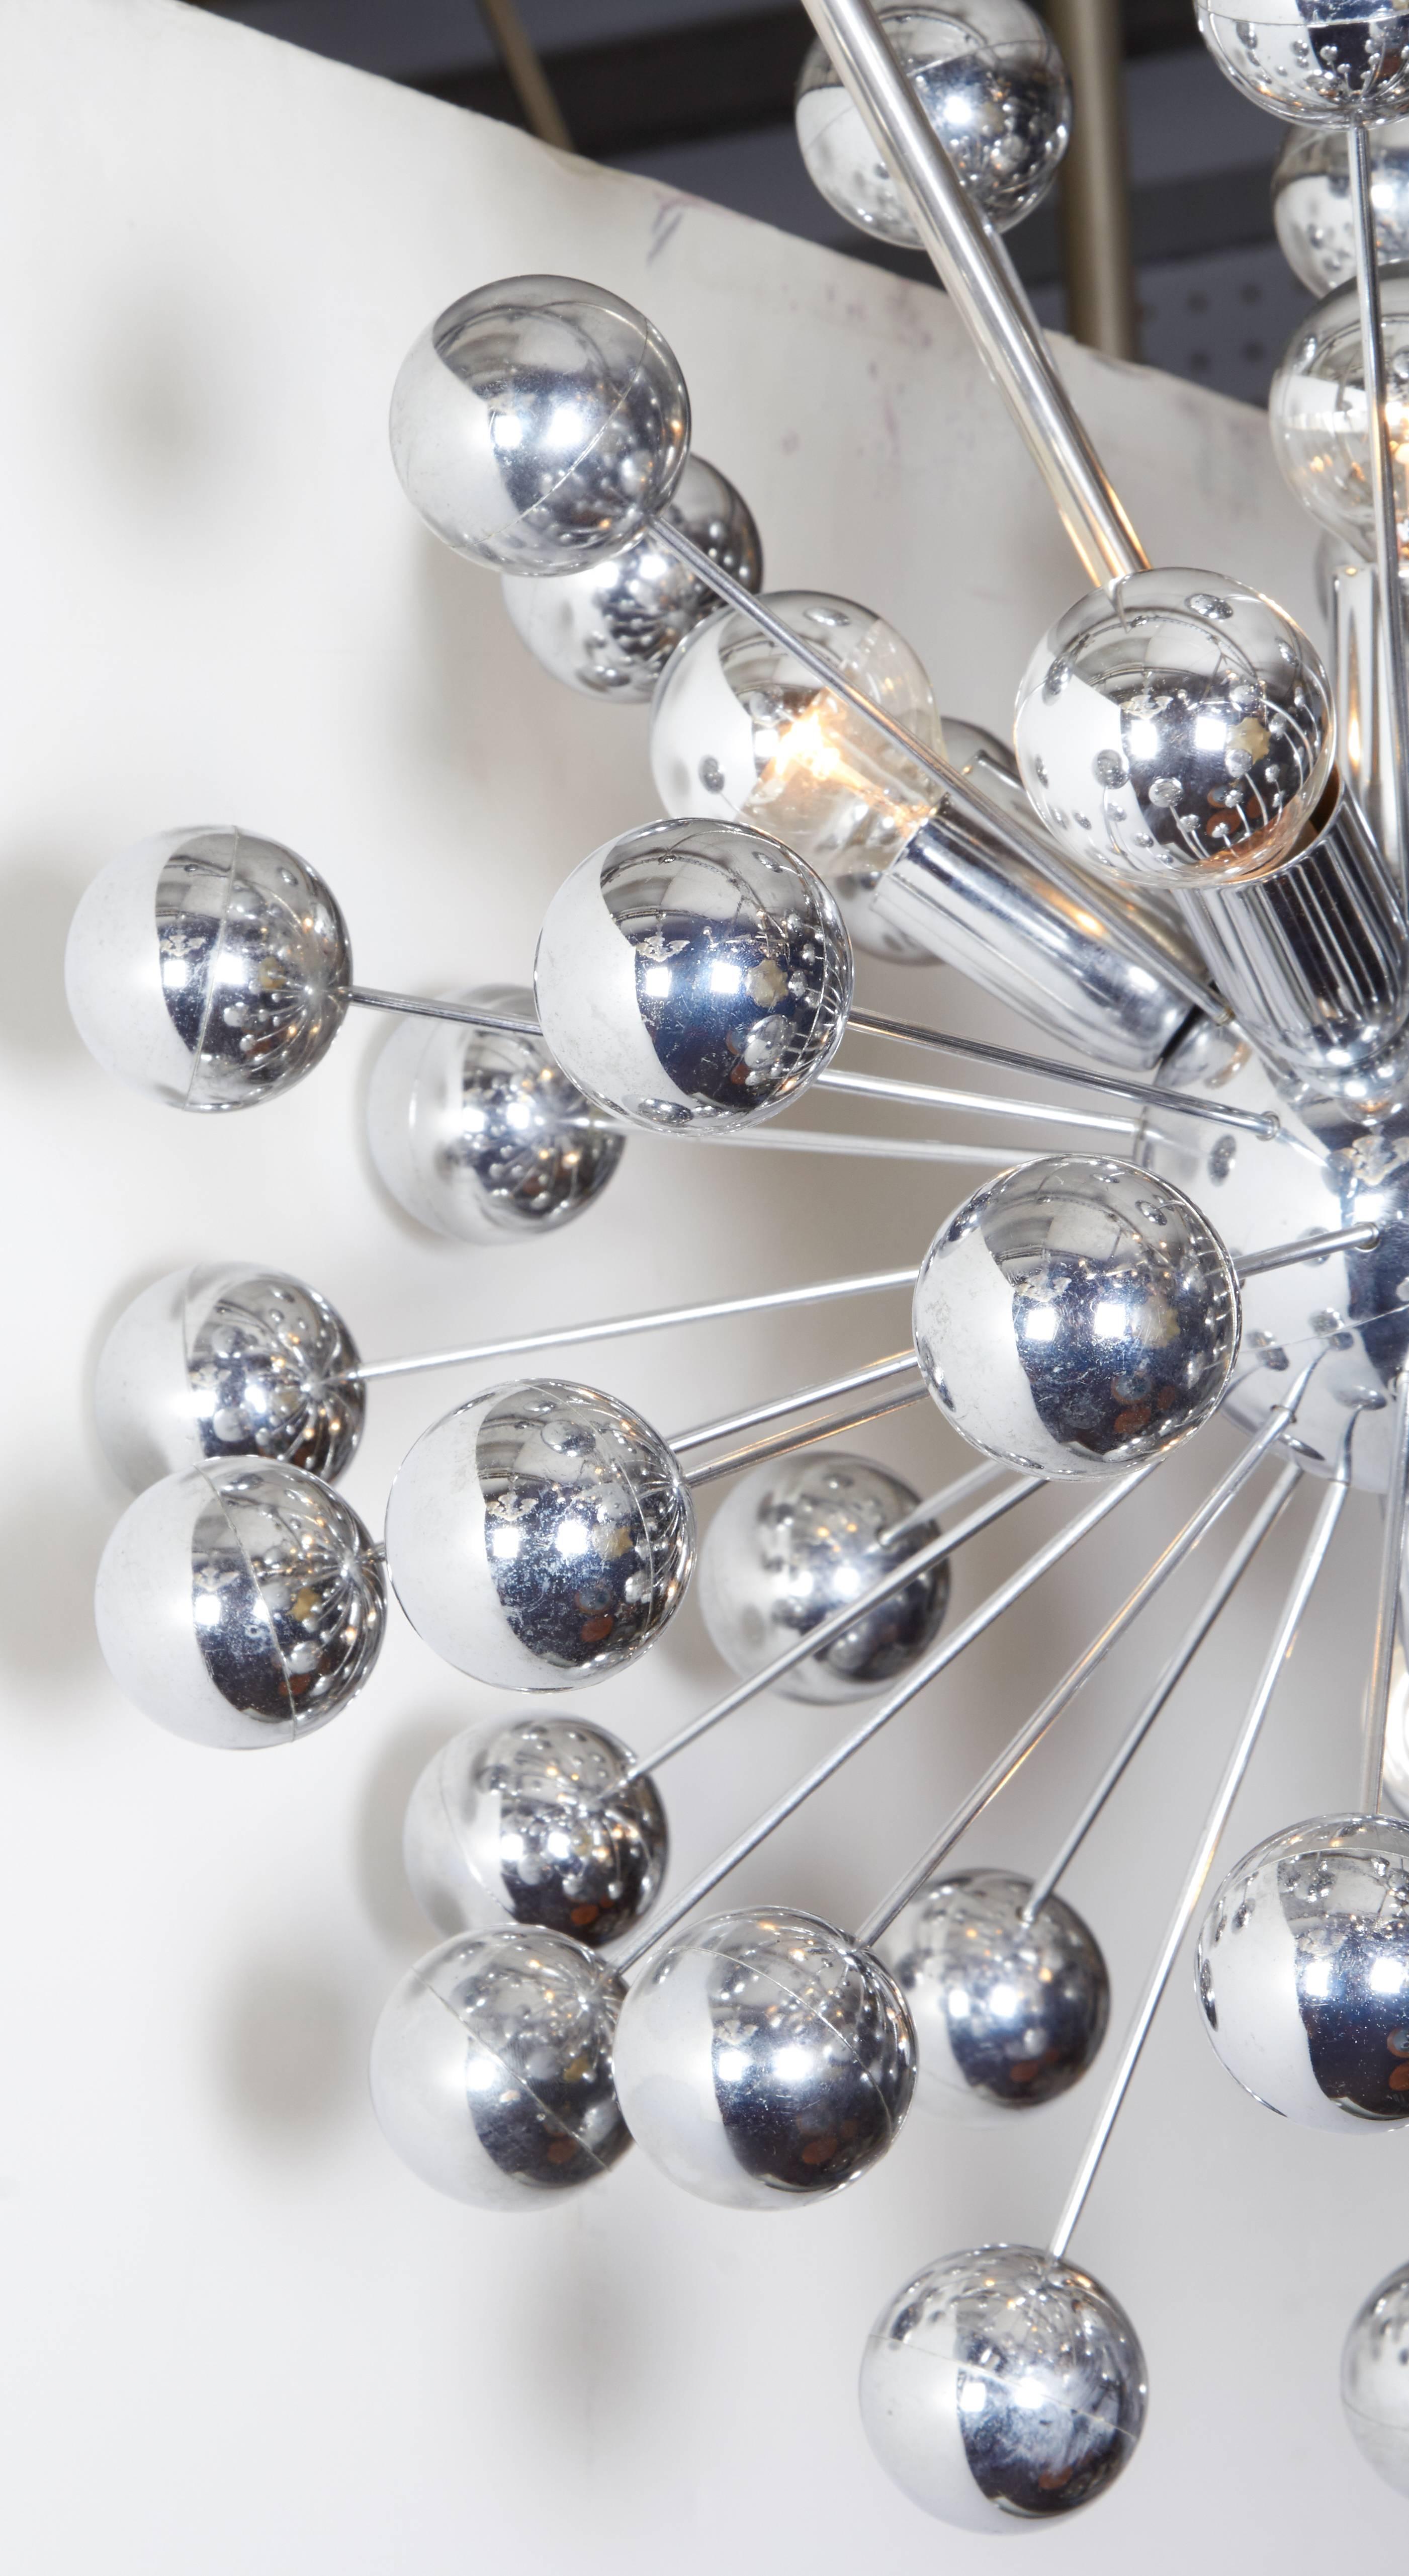 Unique Mid-Century Modern, atomic style chrome Sputnik chandelier. 
This chandelier has an unusual, artistically bent stem which gives it a very sculptural look. Additionally, beside not conforming to the normal vertical drop, it can extend outward